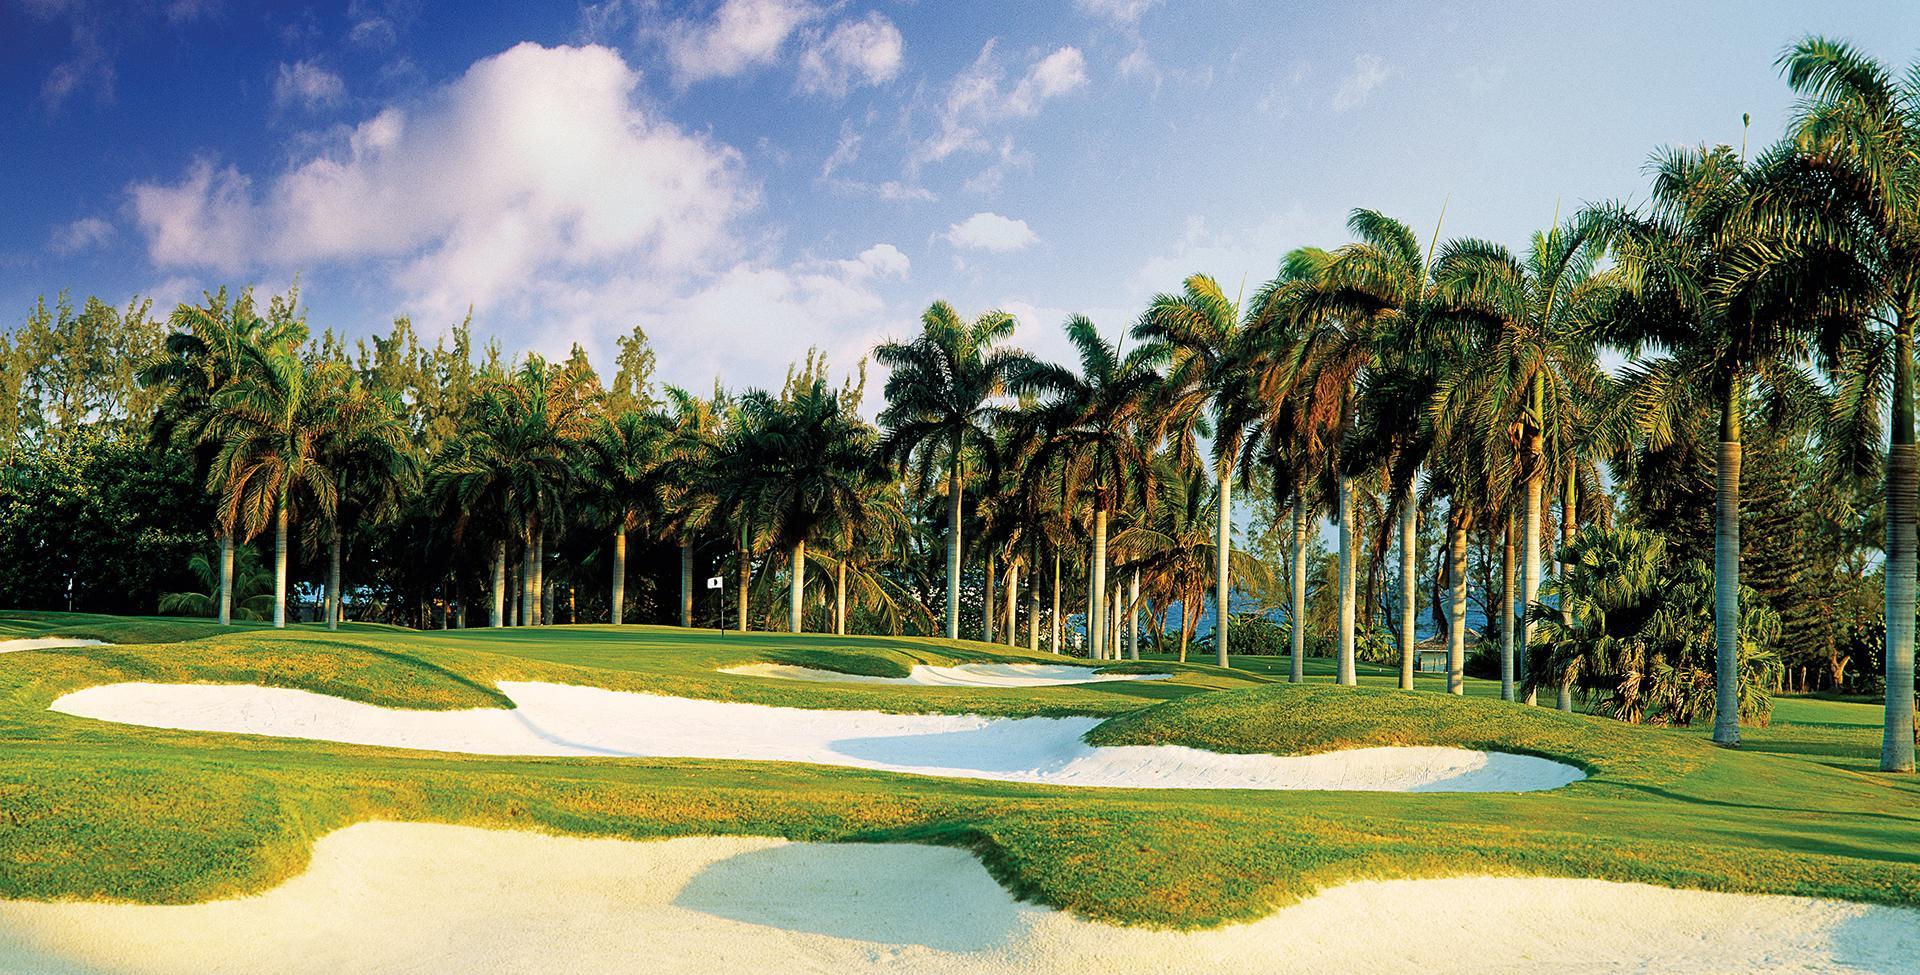 A golf course with sand bunkers and palm trees